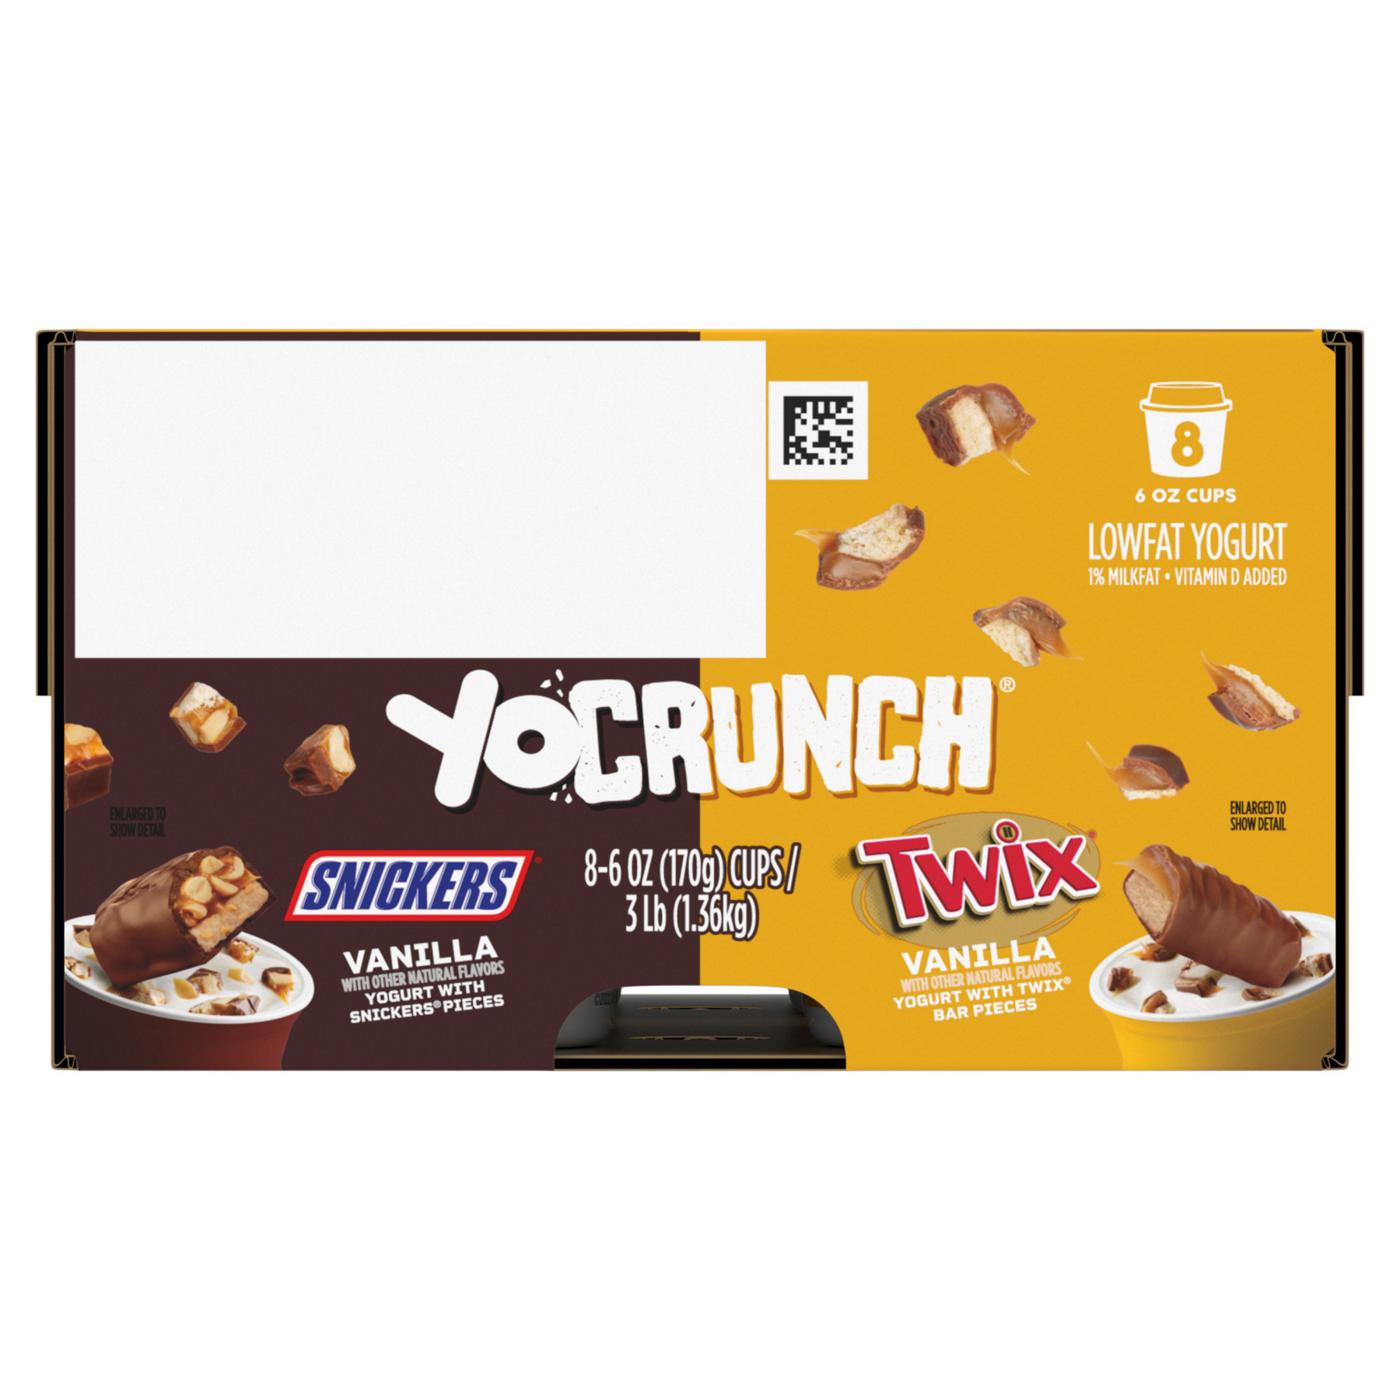 YoCrunch Lowfat Vanilla With Snickers And Twix Variety Pack Yogurt, 4 oz Cups; image 6 of 9